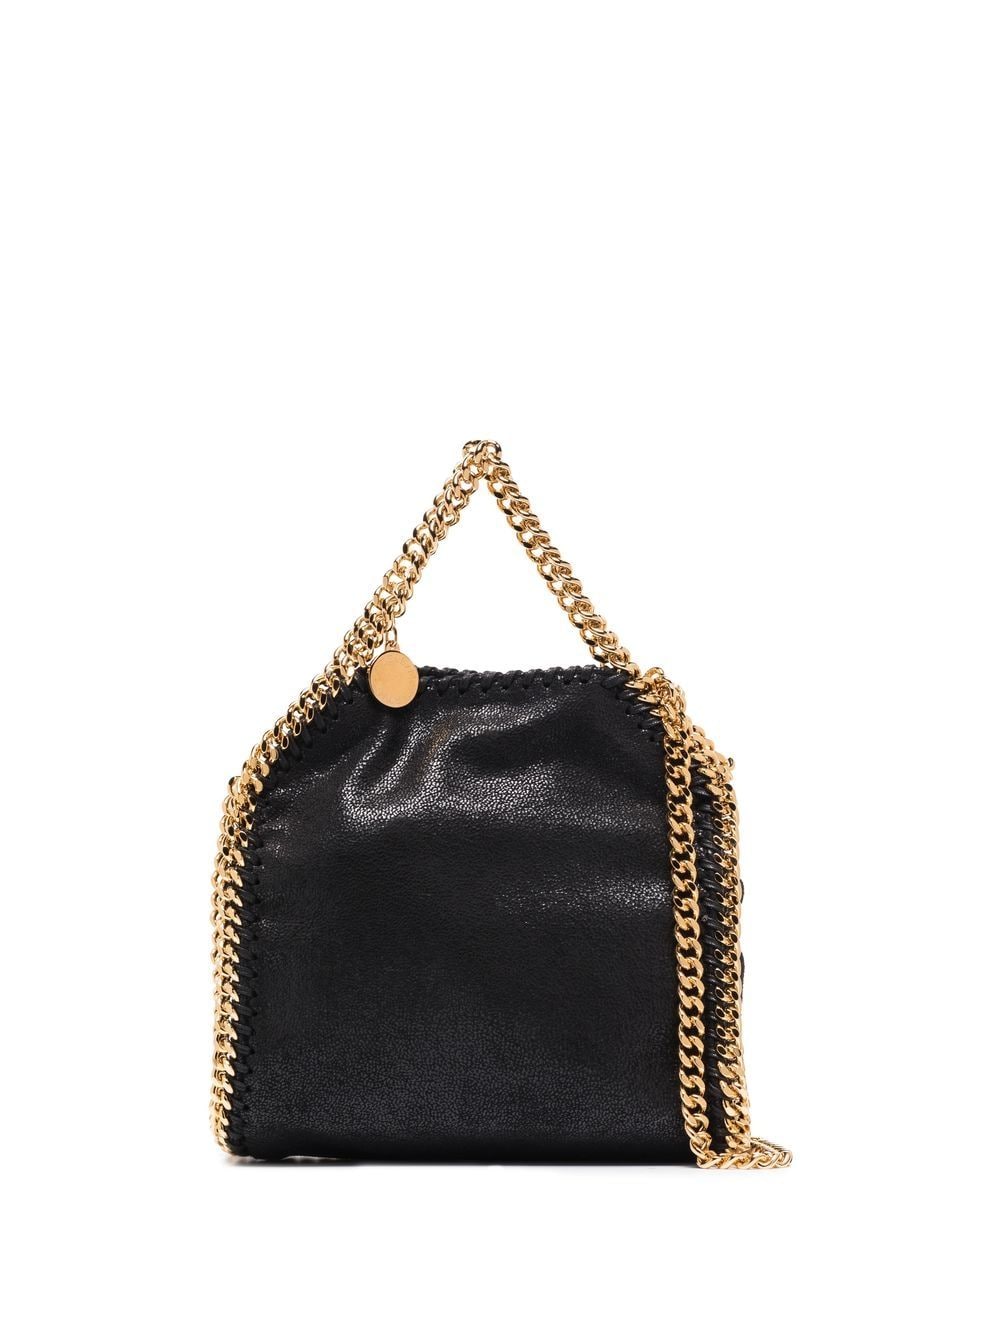 STELLA MCCARTNEY Black Faux Leather Mini Tote with Signature Chain-Link Trims